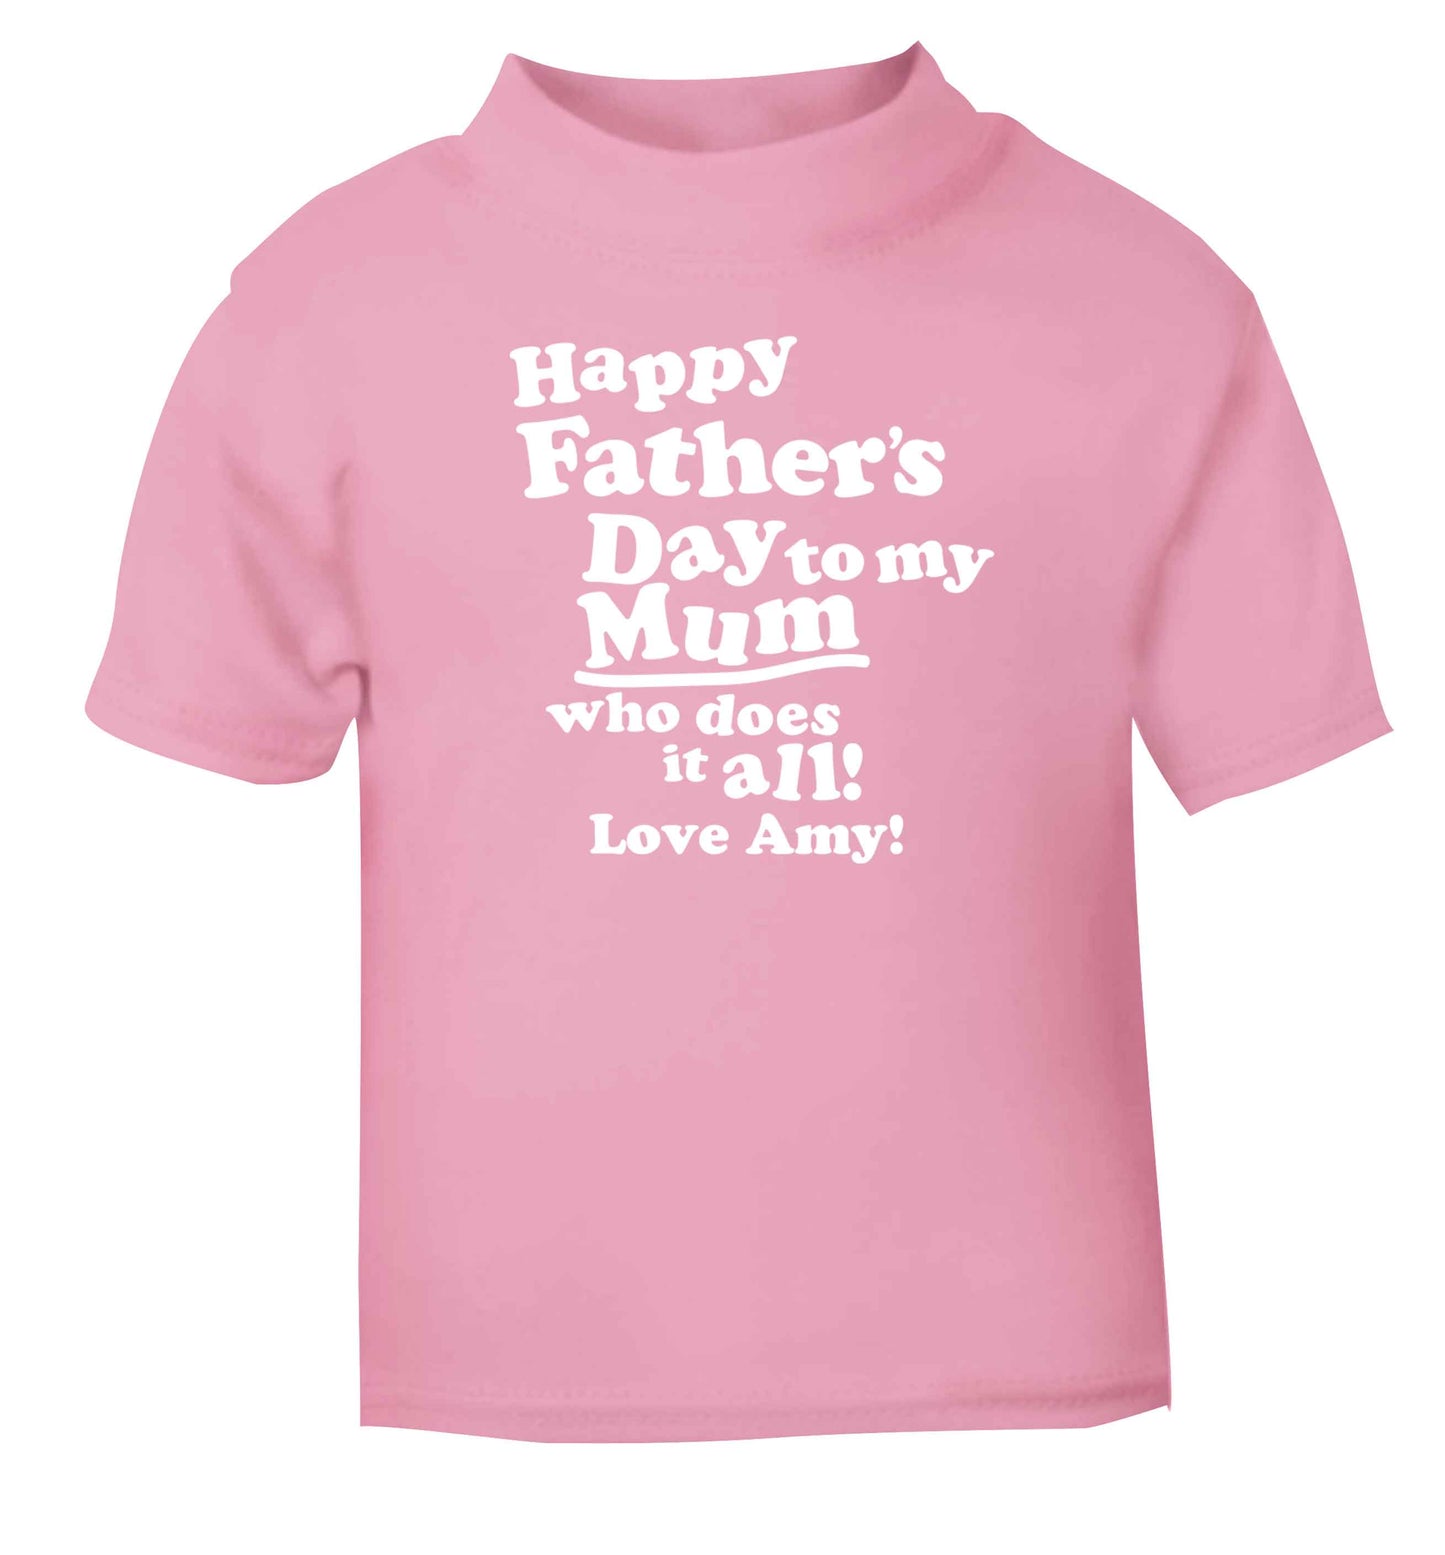 Happy Father's day to my mum who does it all light pink baby toddler Tshirt 2 Years